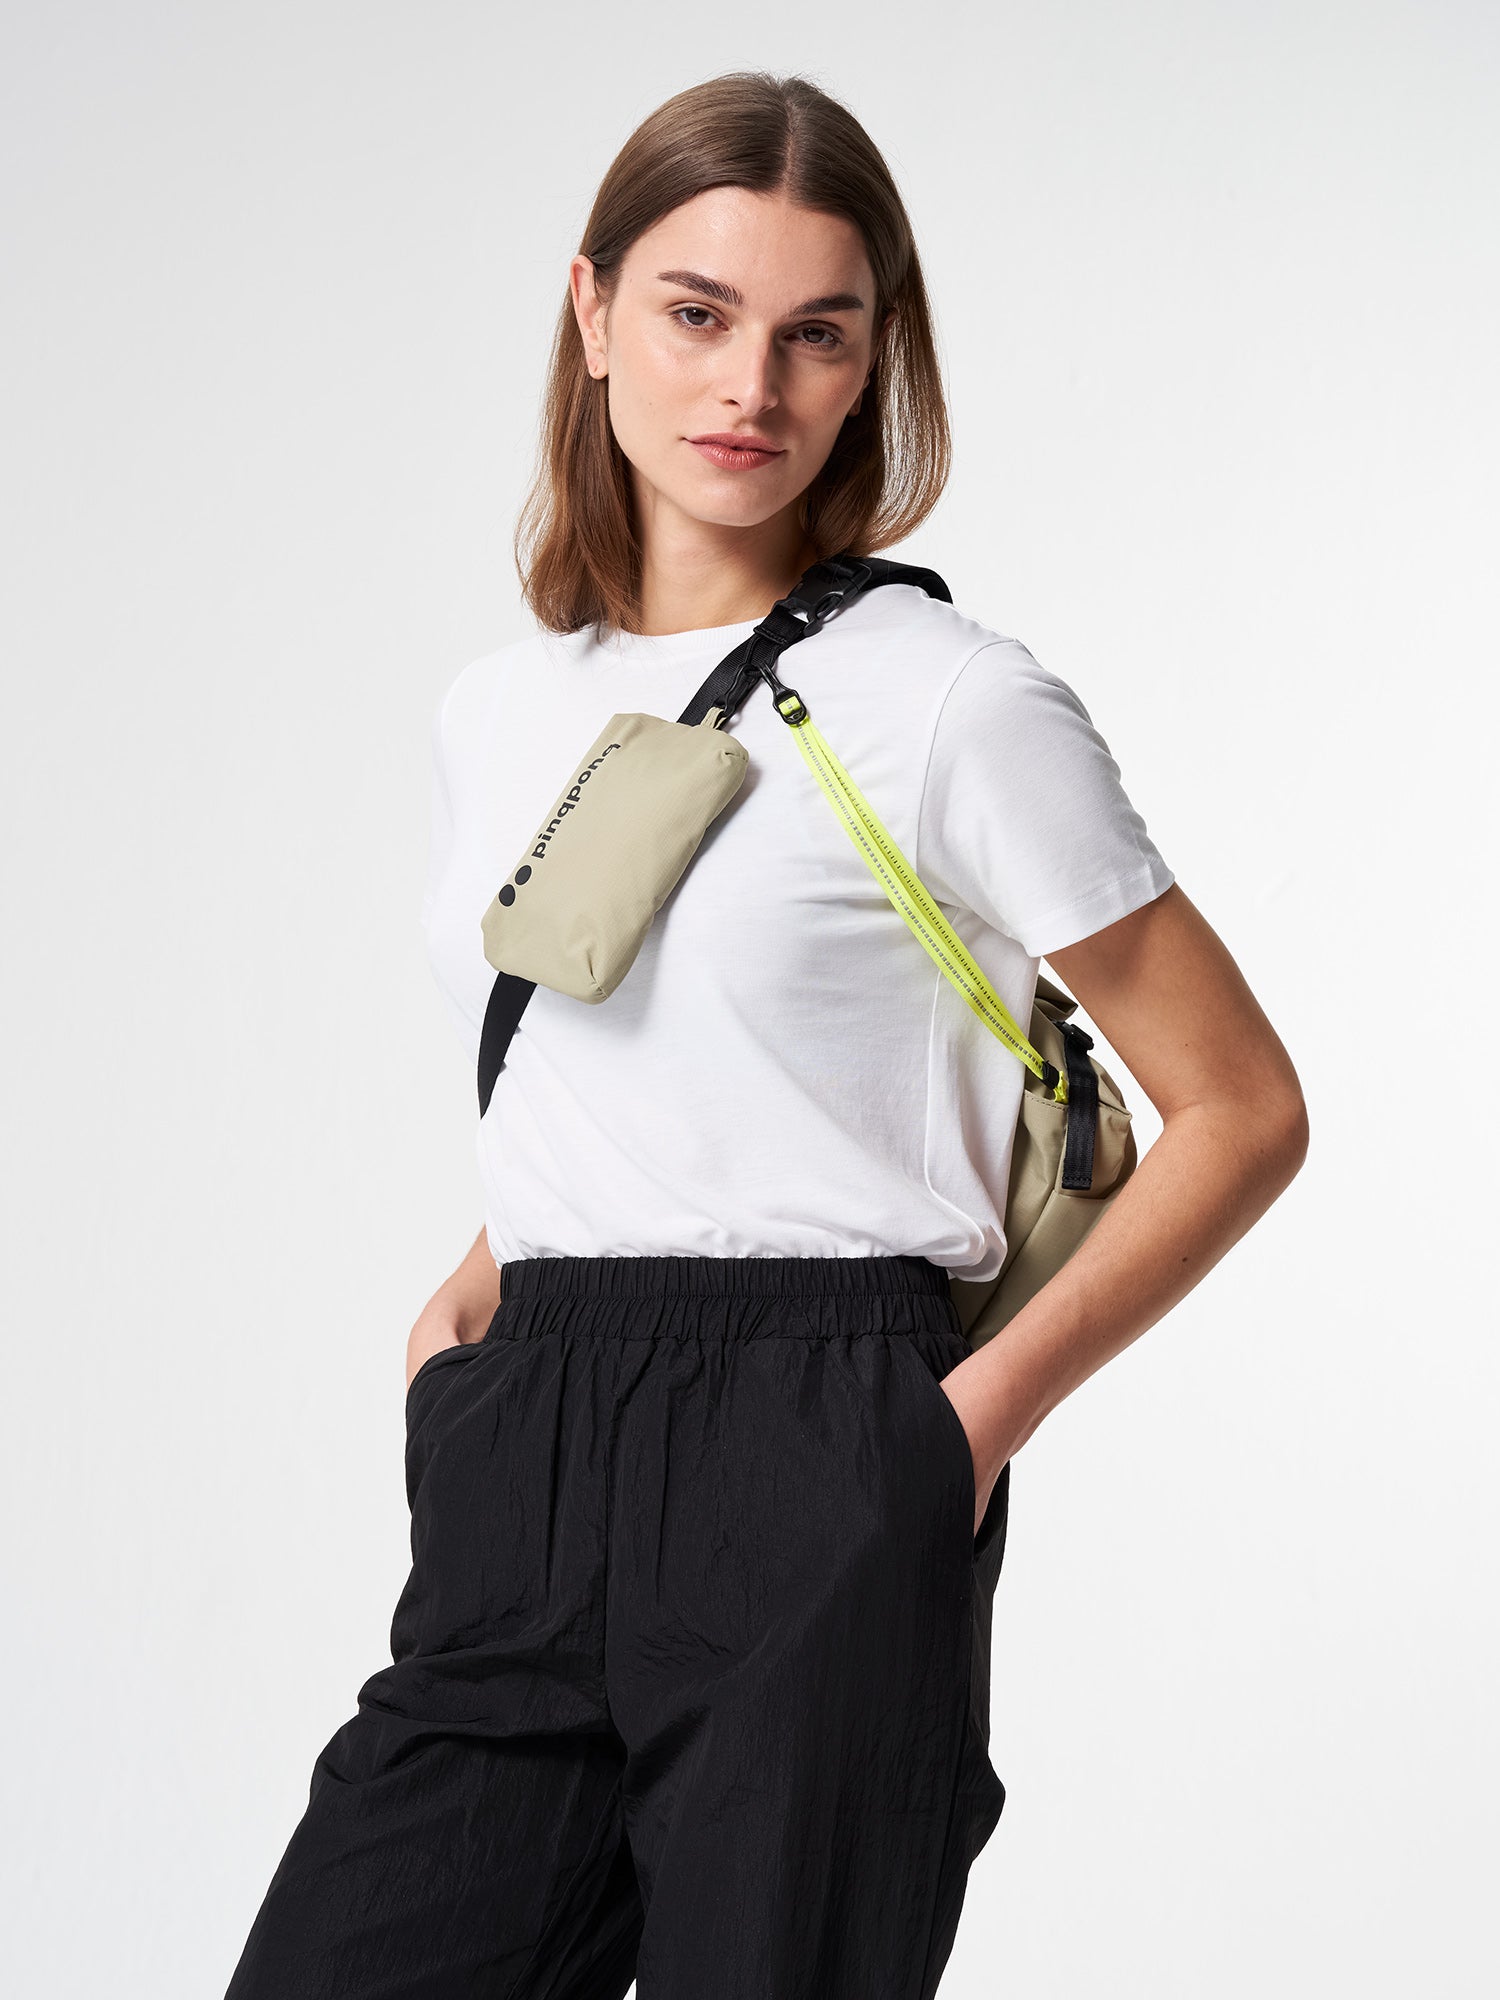 Aksel Hip Bag: Versatile, durable, pinqponq and ✓ – sustainable